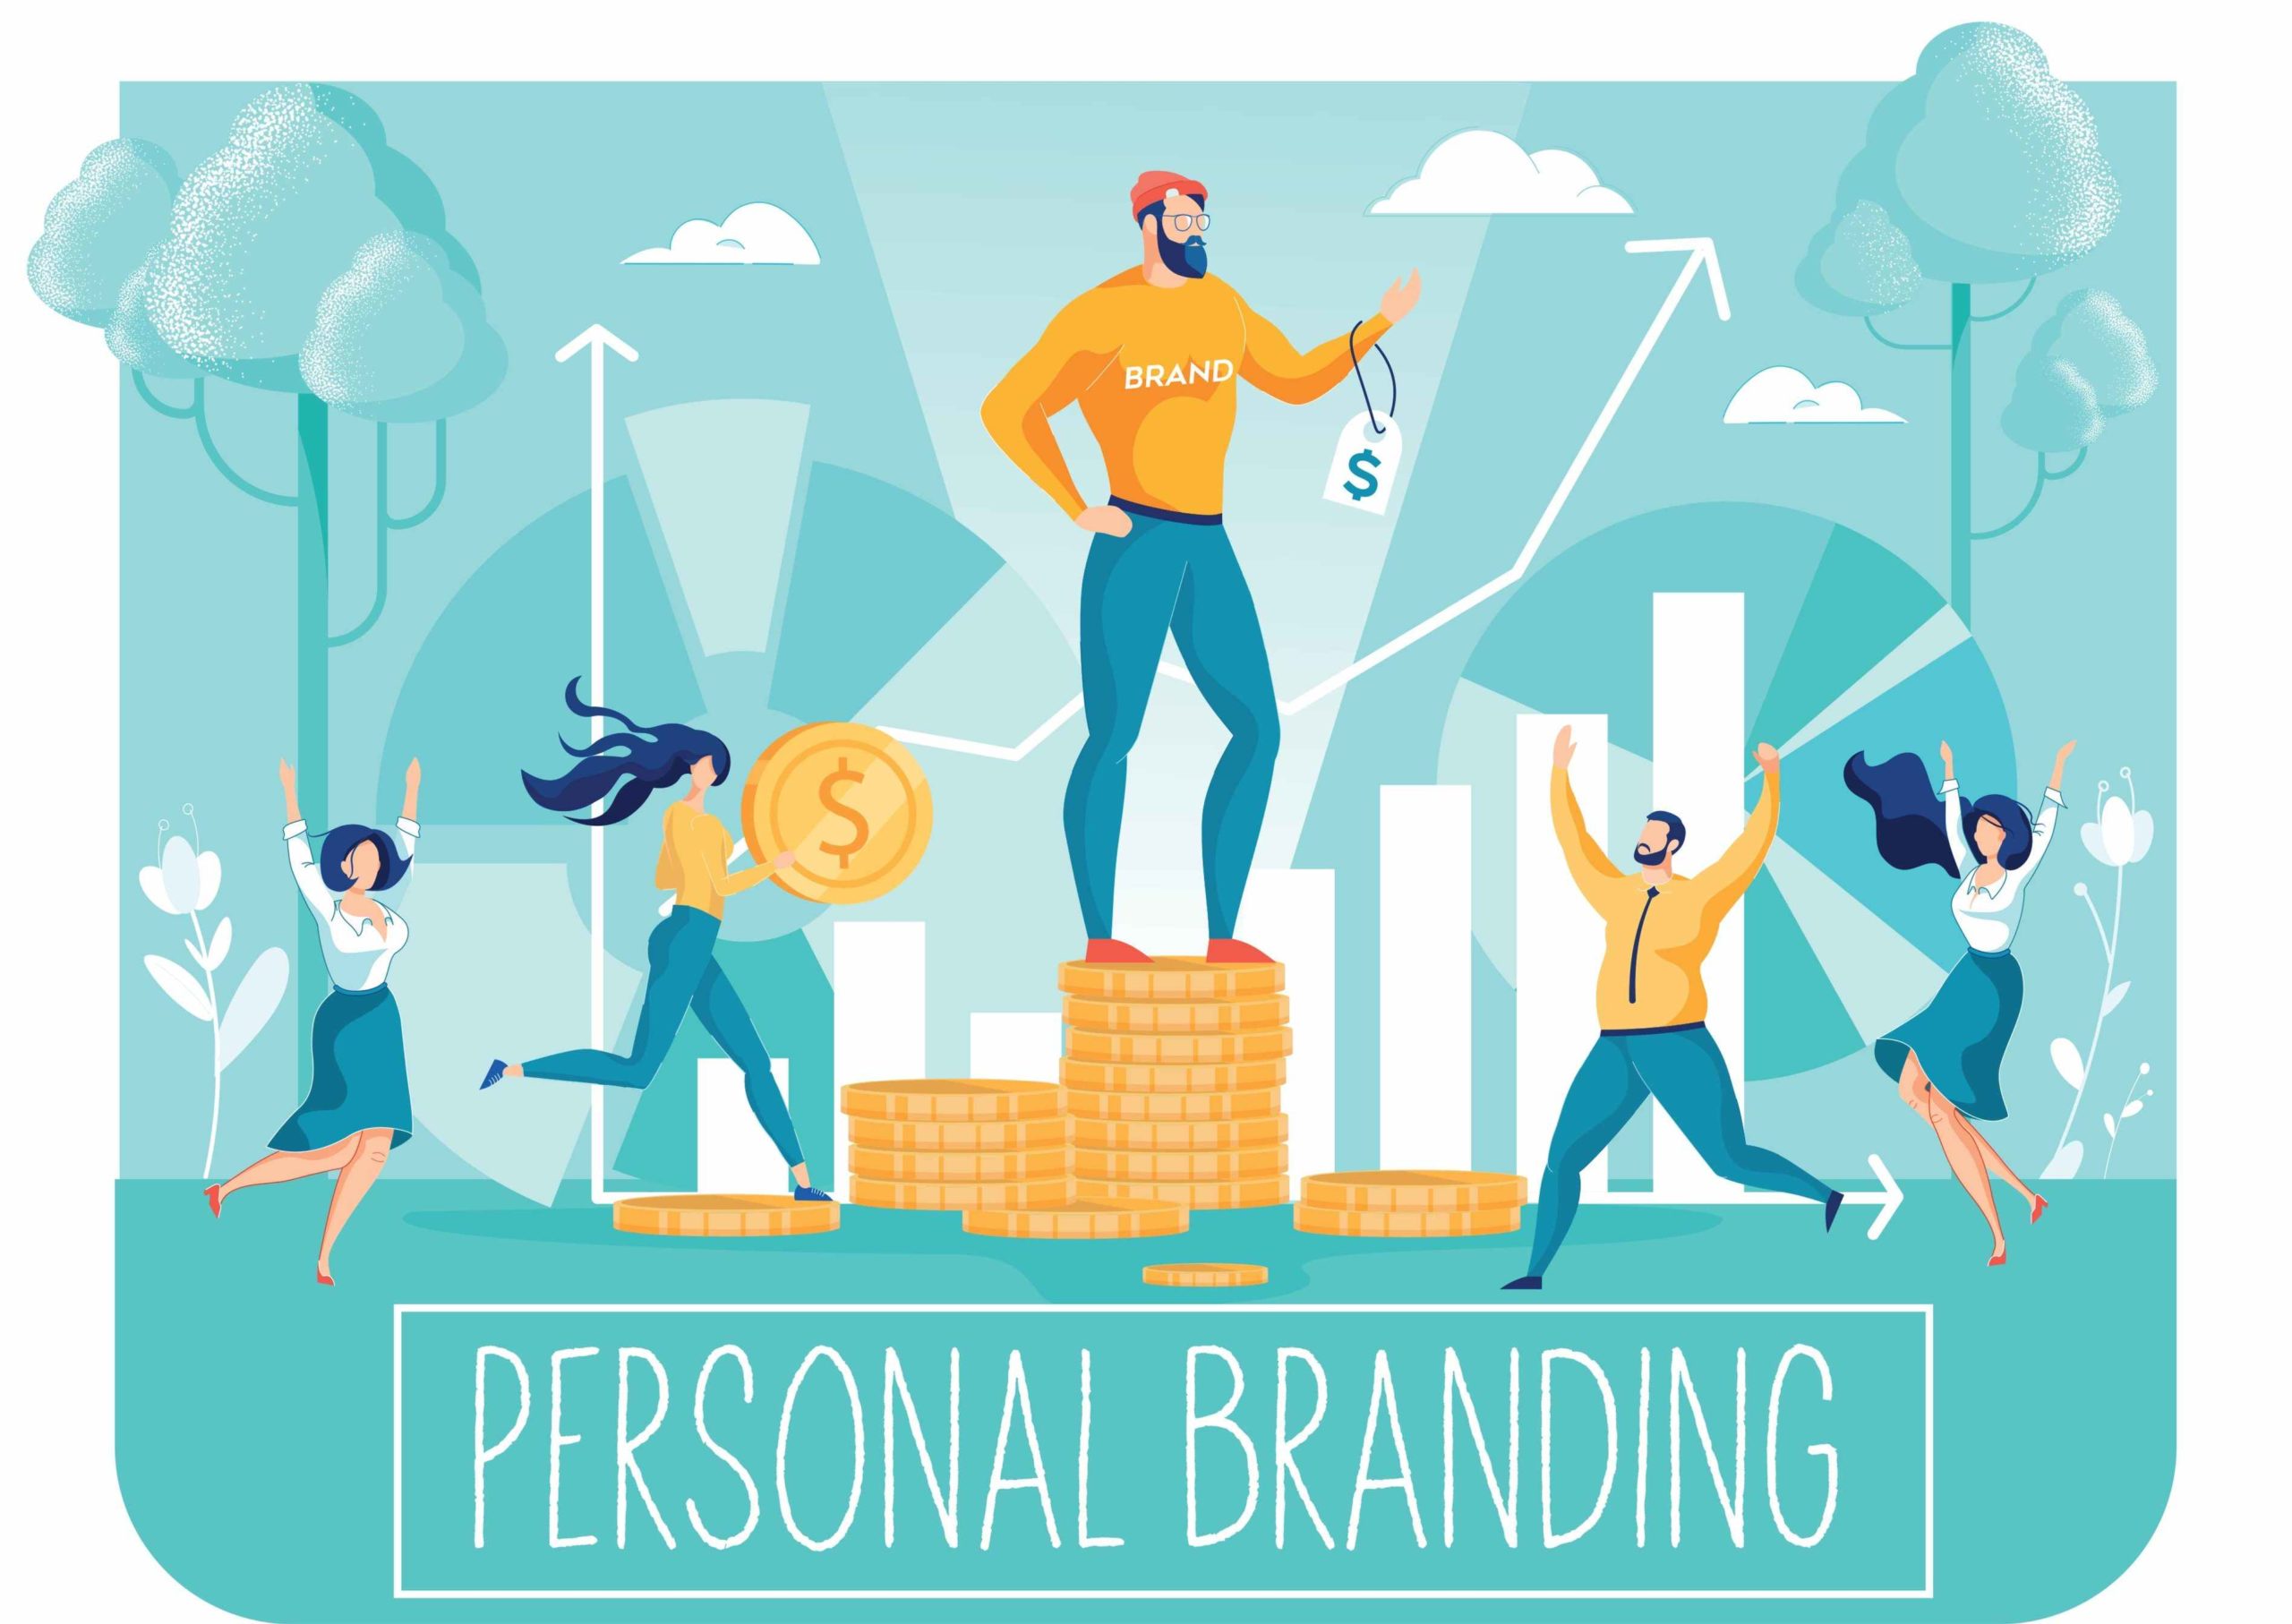 Creating personal branding is necessary for individuals as well as companies